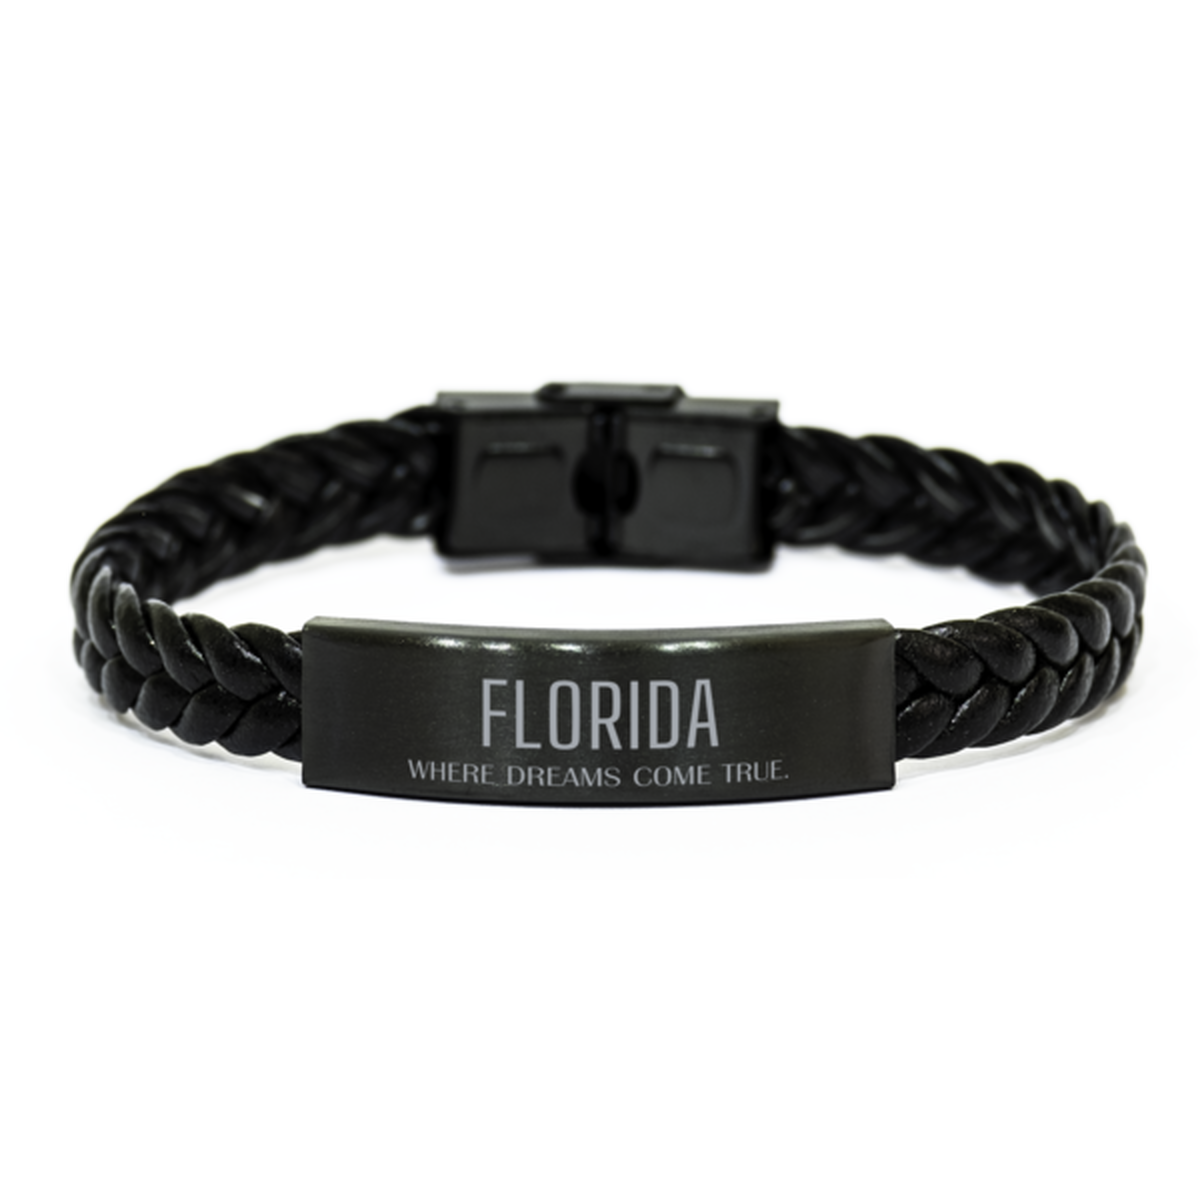 Love Florida State Braided Leather Bracelet, Florida Where dreams come true, Birthday Inspirational Gifts For Florida Men, Women, Friends